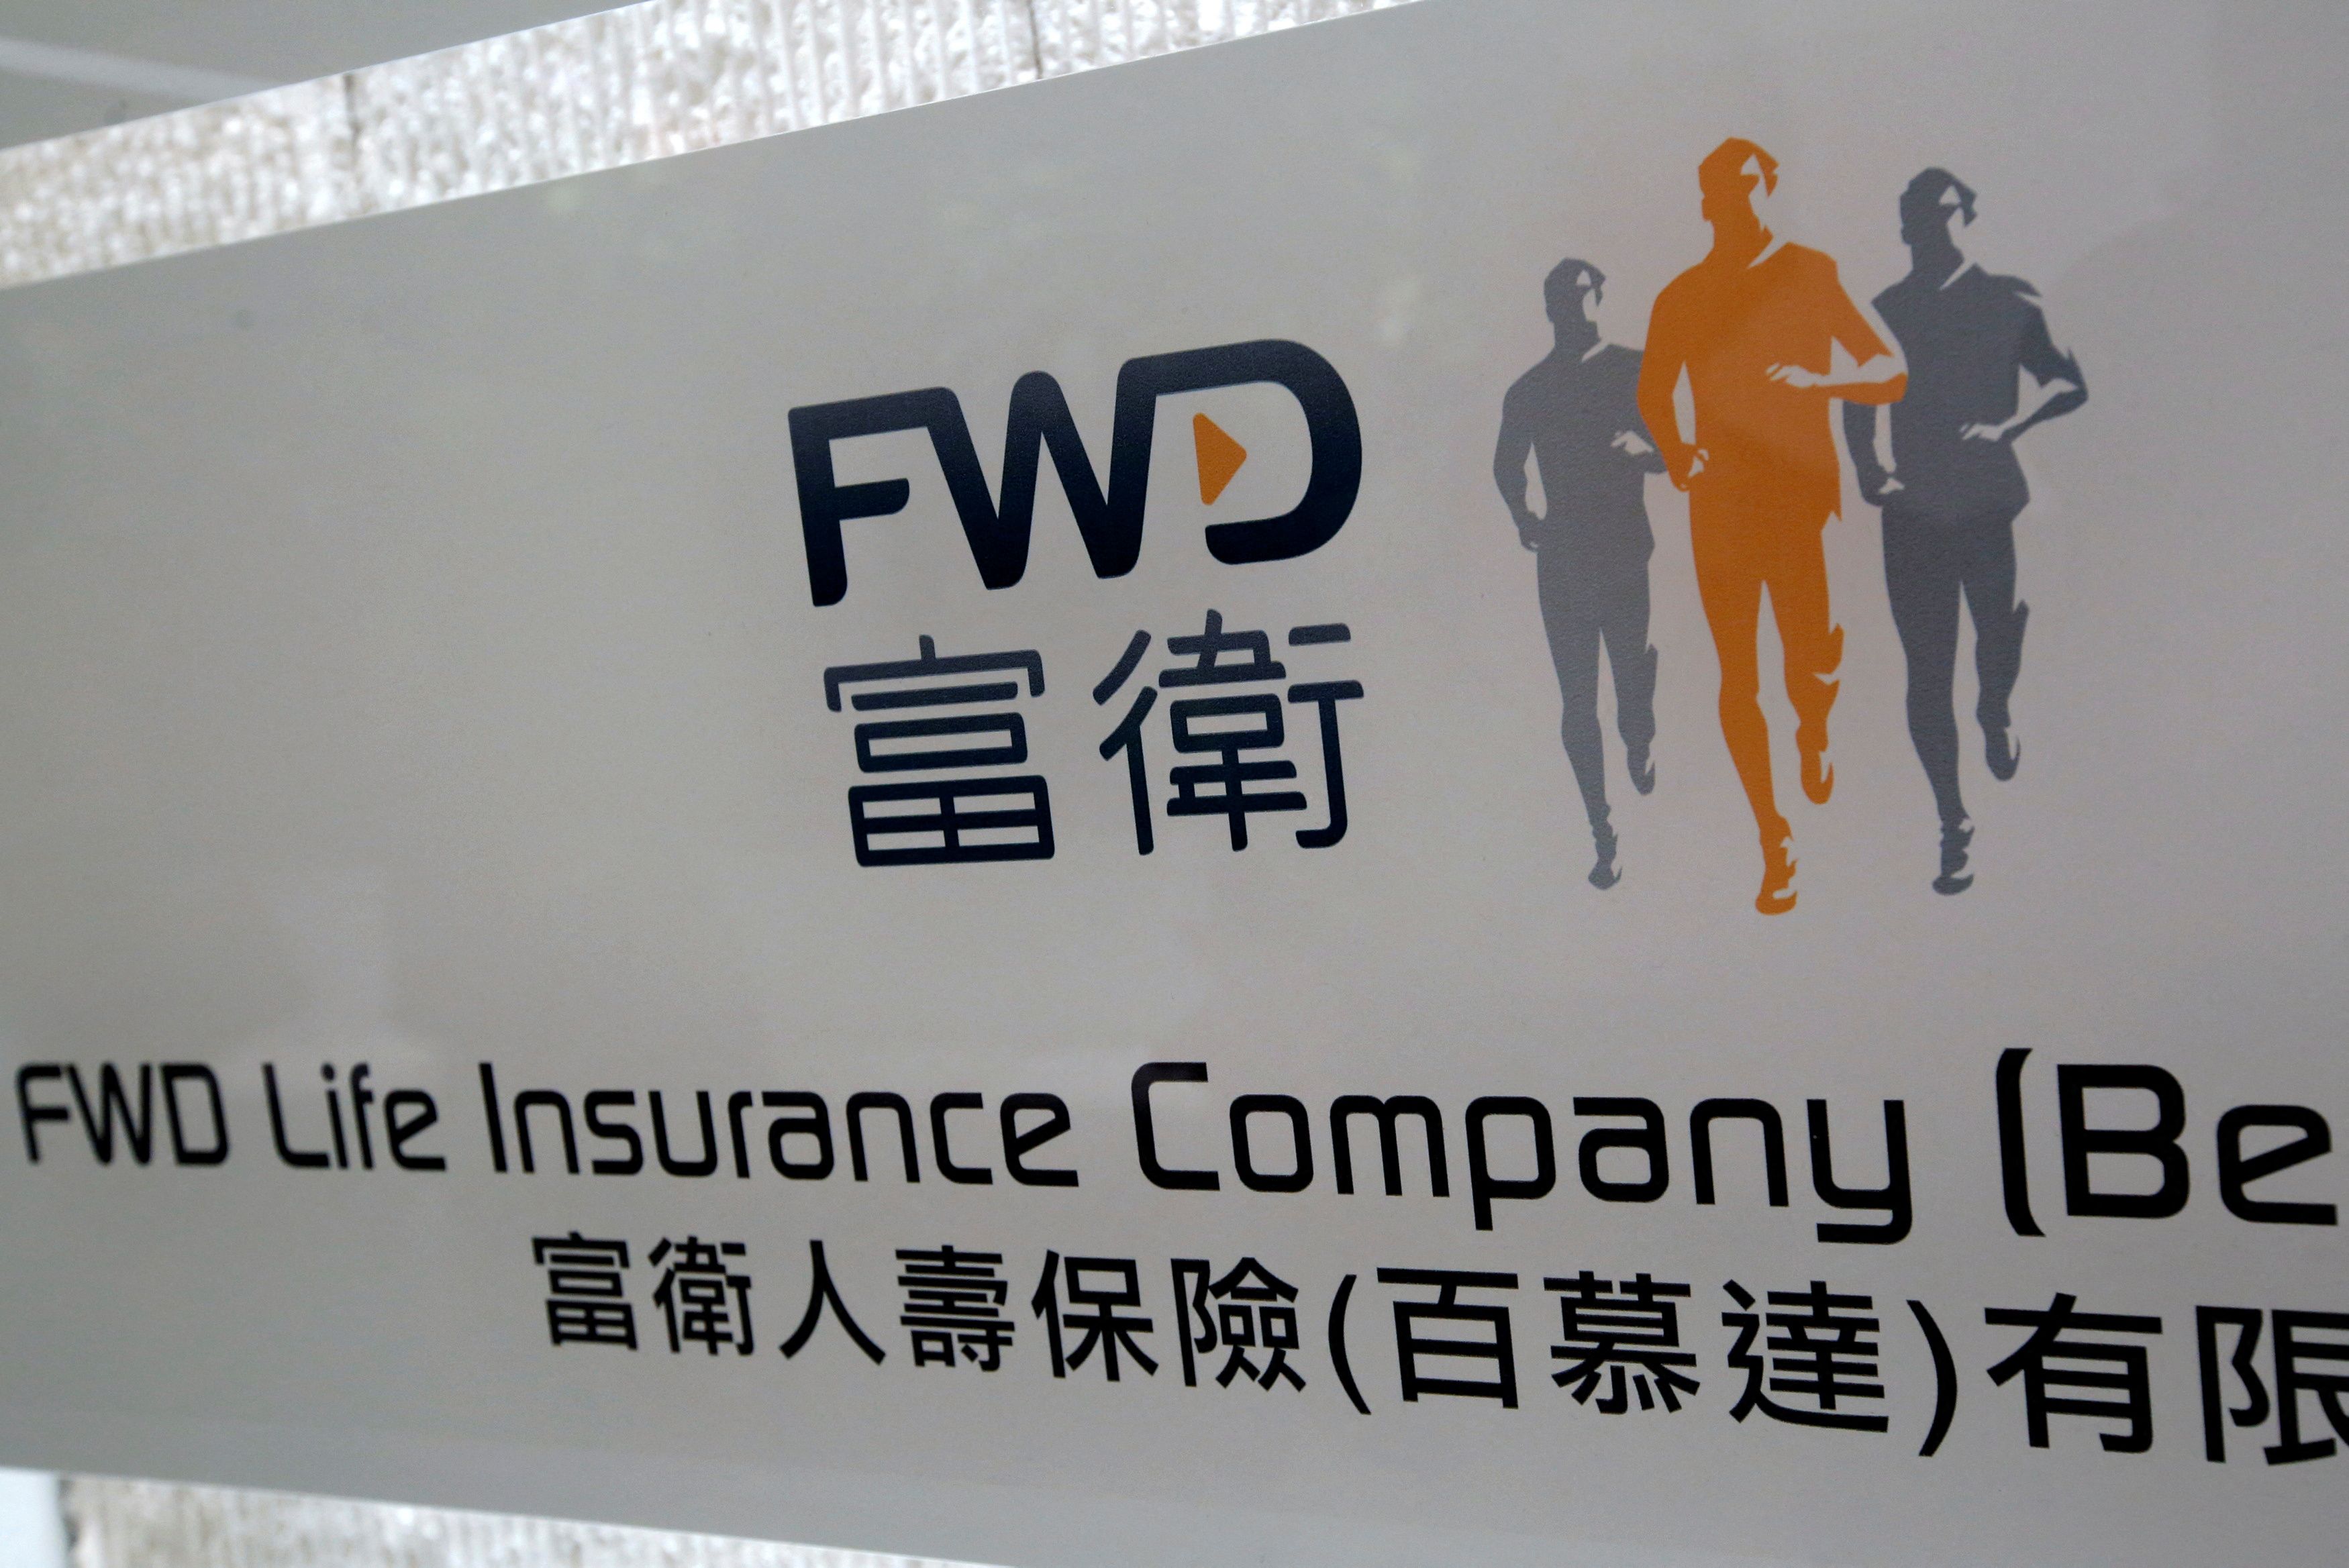 The company logo of FWD is displayed at the lobby of a commercial building in Hong Kong